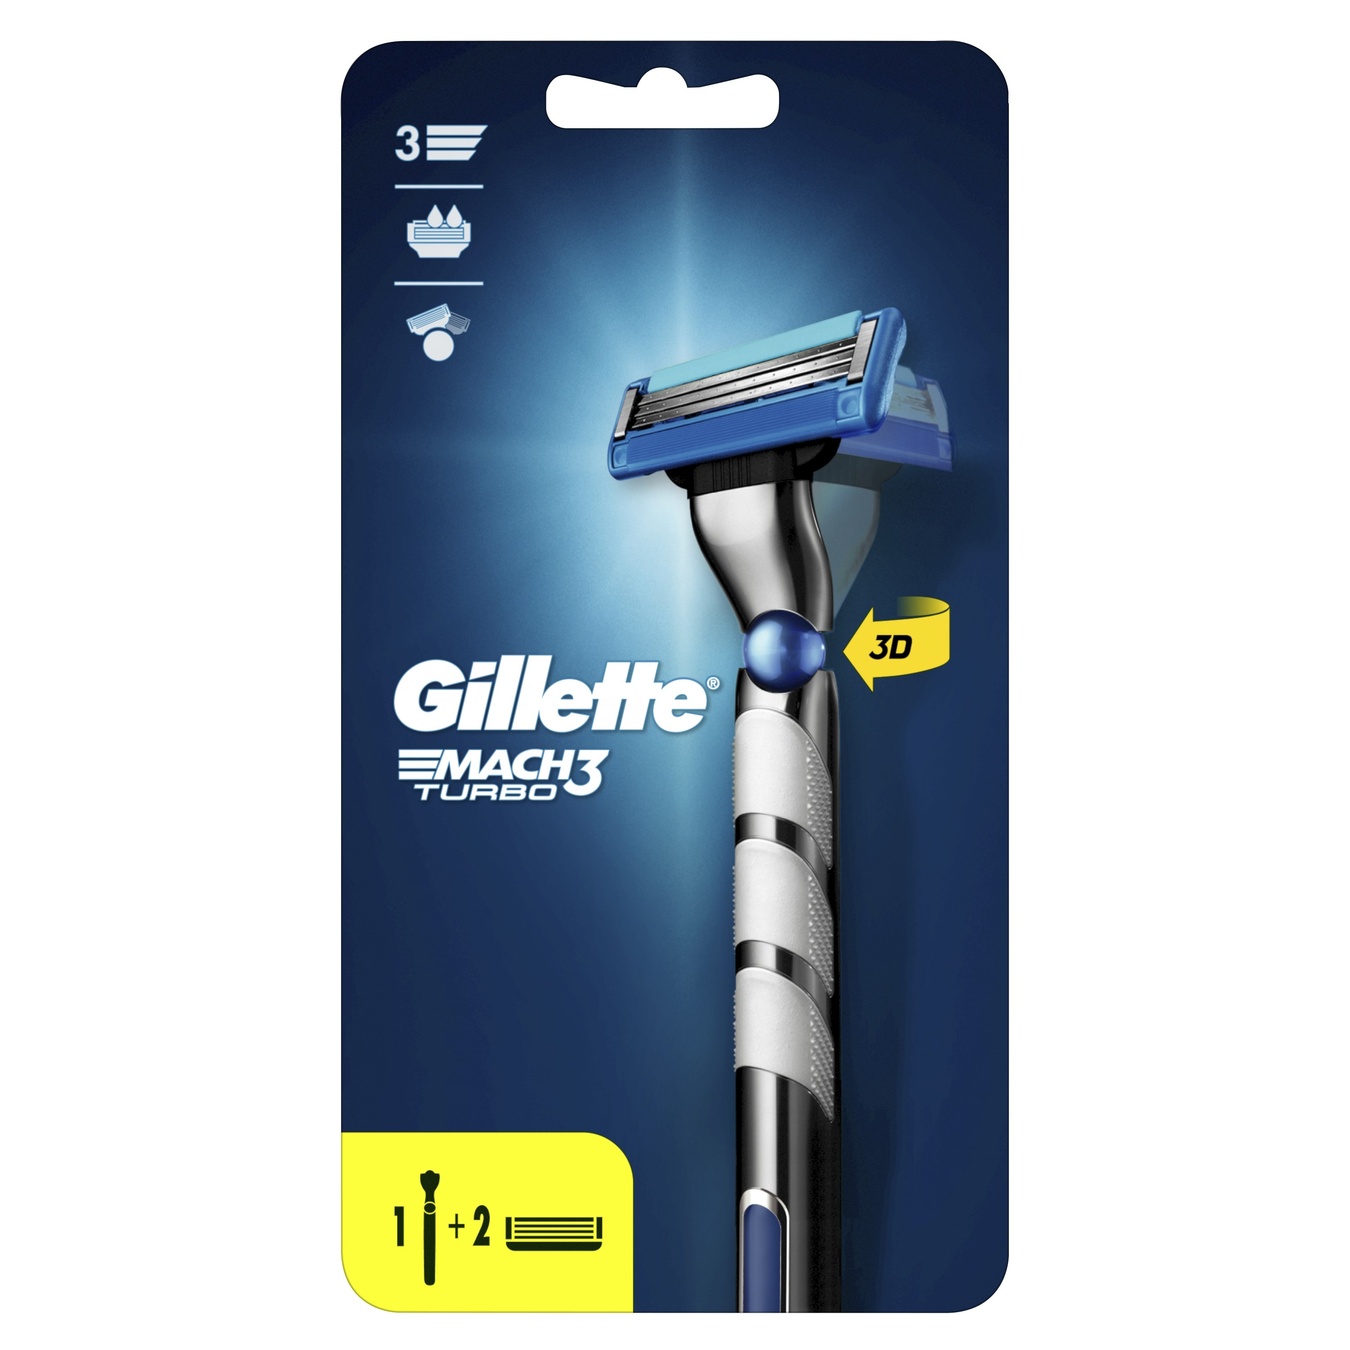 Gillette Mach3 Turbo 3D razor with 2 replaceable cartridges